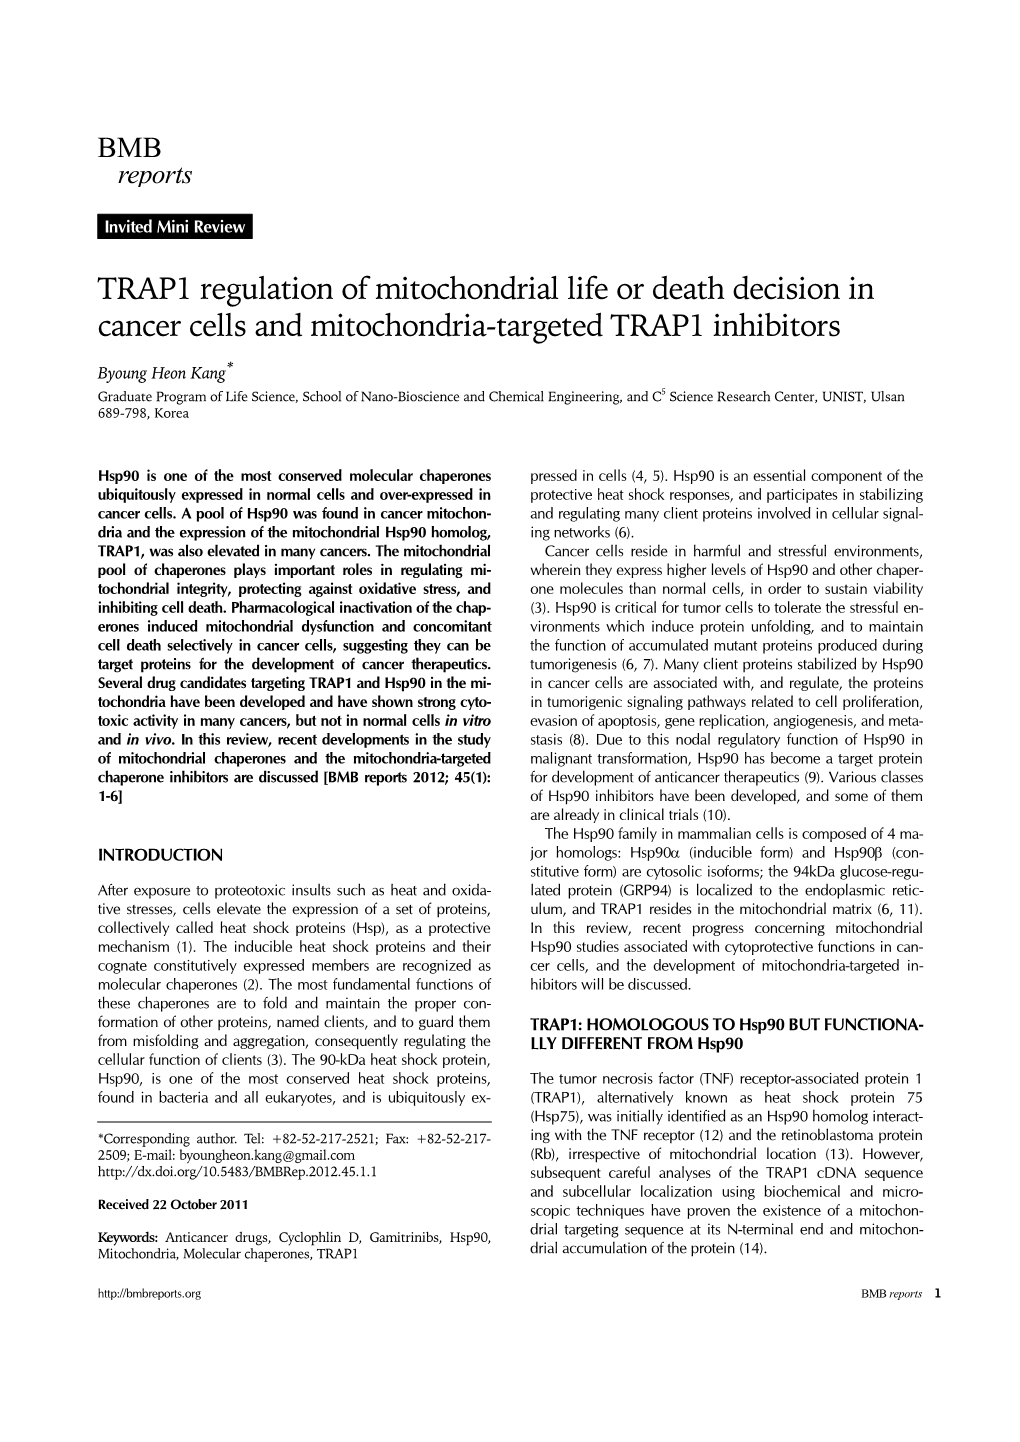 TRAP1 Regulation of Mitochondrial Life Or Death Decision in Cancer Cells and Mitochondria-Targeted TRAP1 Inhibitors